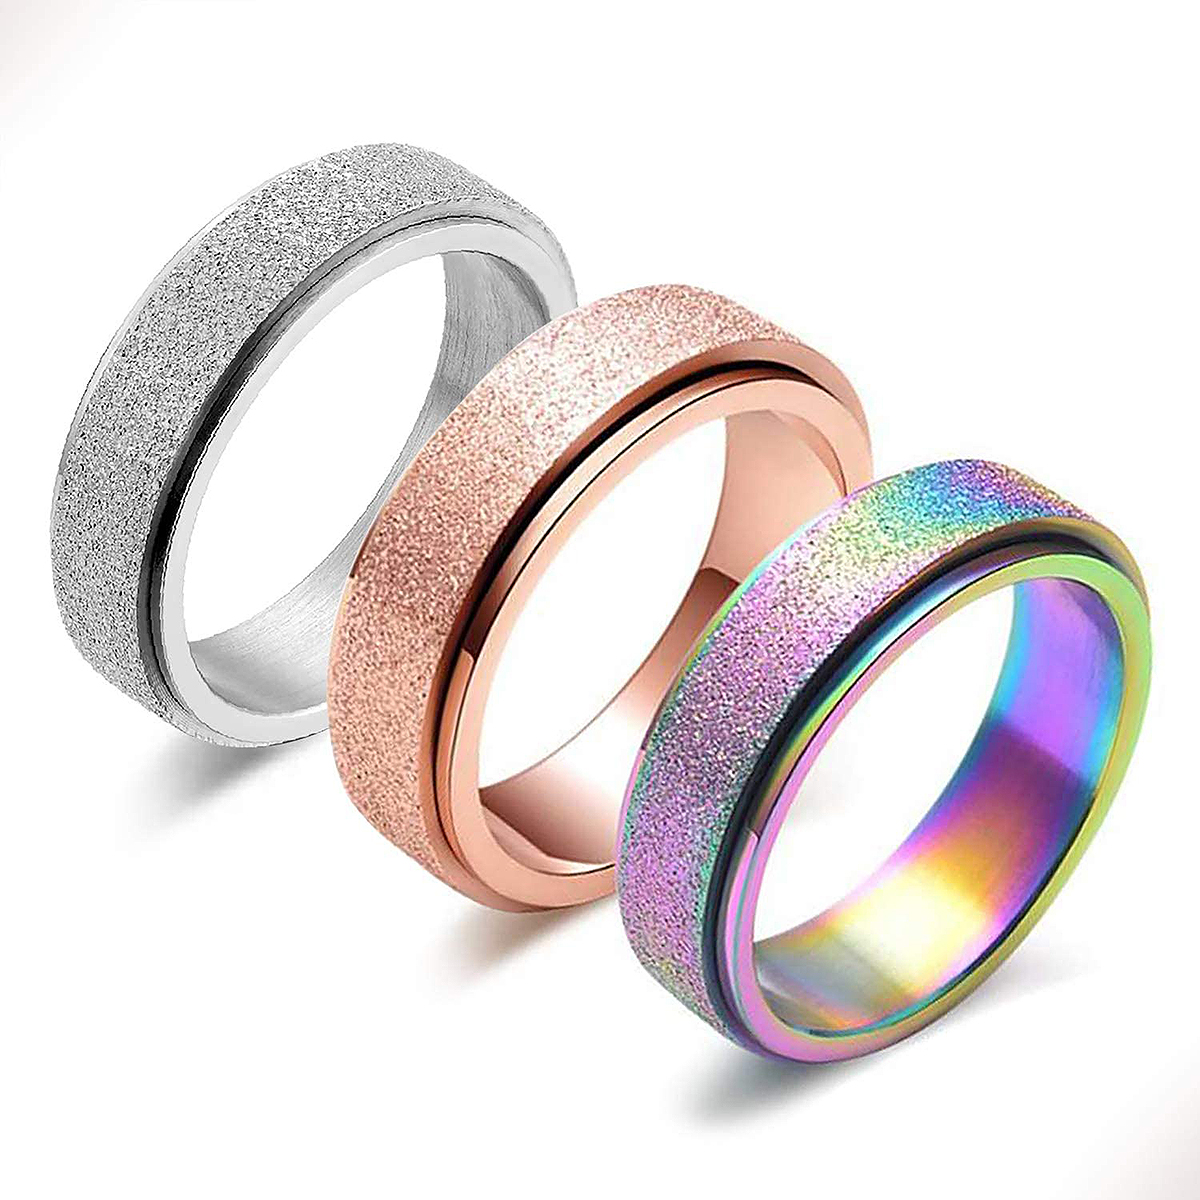 Sterling Silver Spinning, Fidget and Worry Rings | Otis Jaxon Jewellery